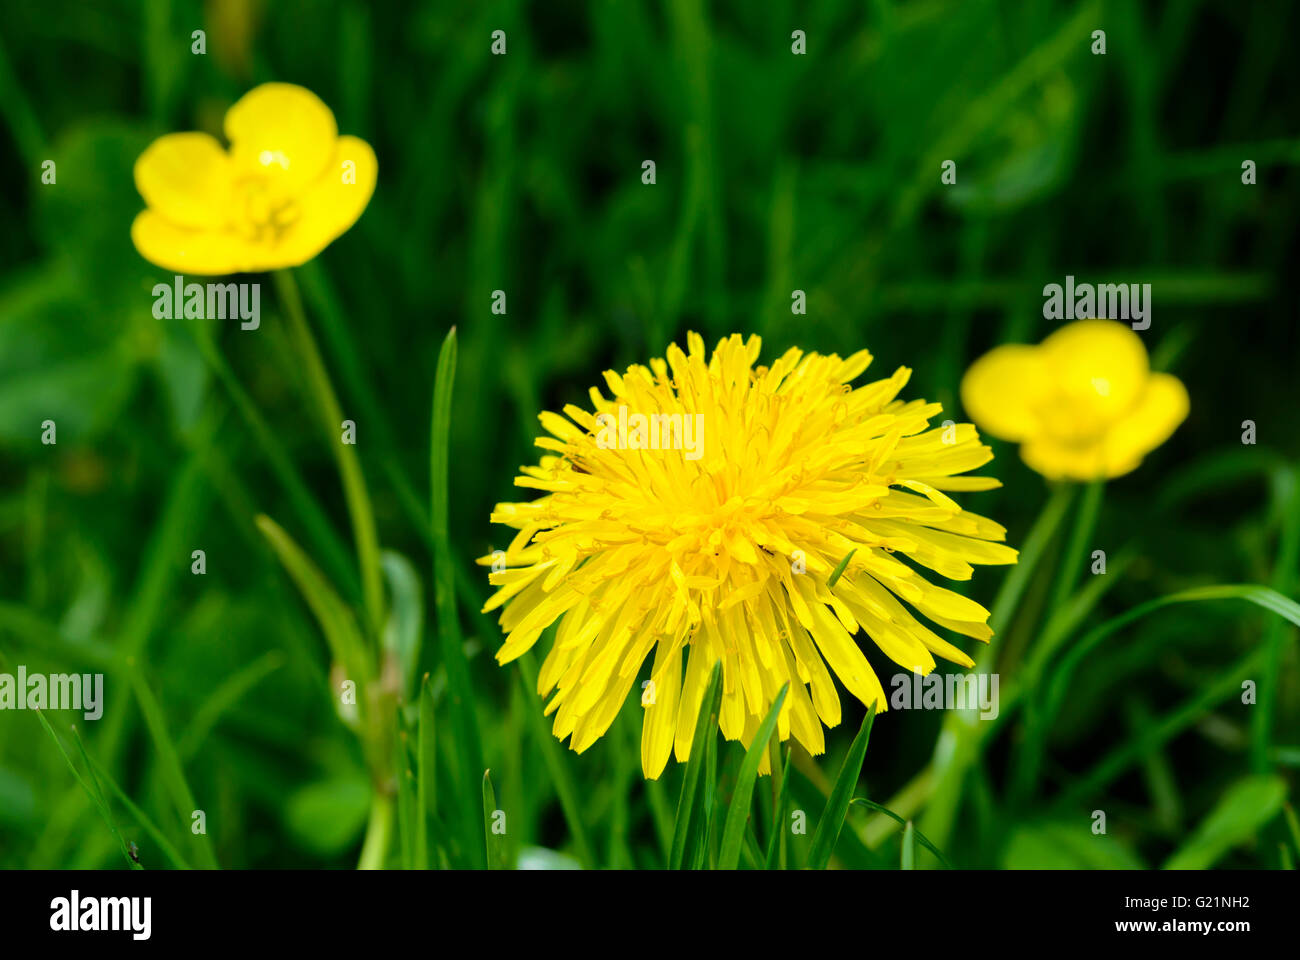 Common yellow dandelion (Taraxacum officinale) growing amongst buttercups and grass in early summer, in West Sussex, UK. Stock Photo